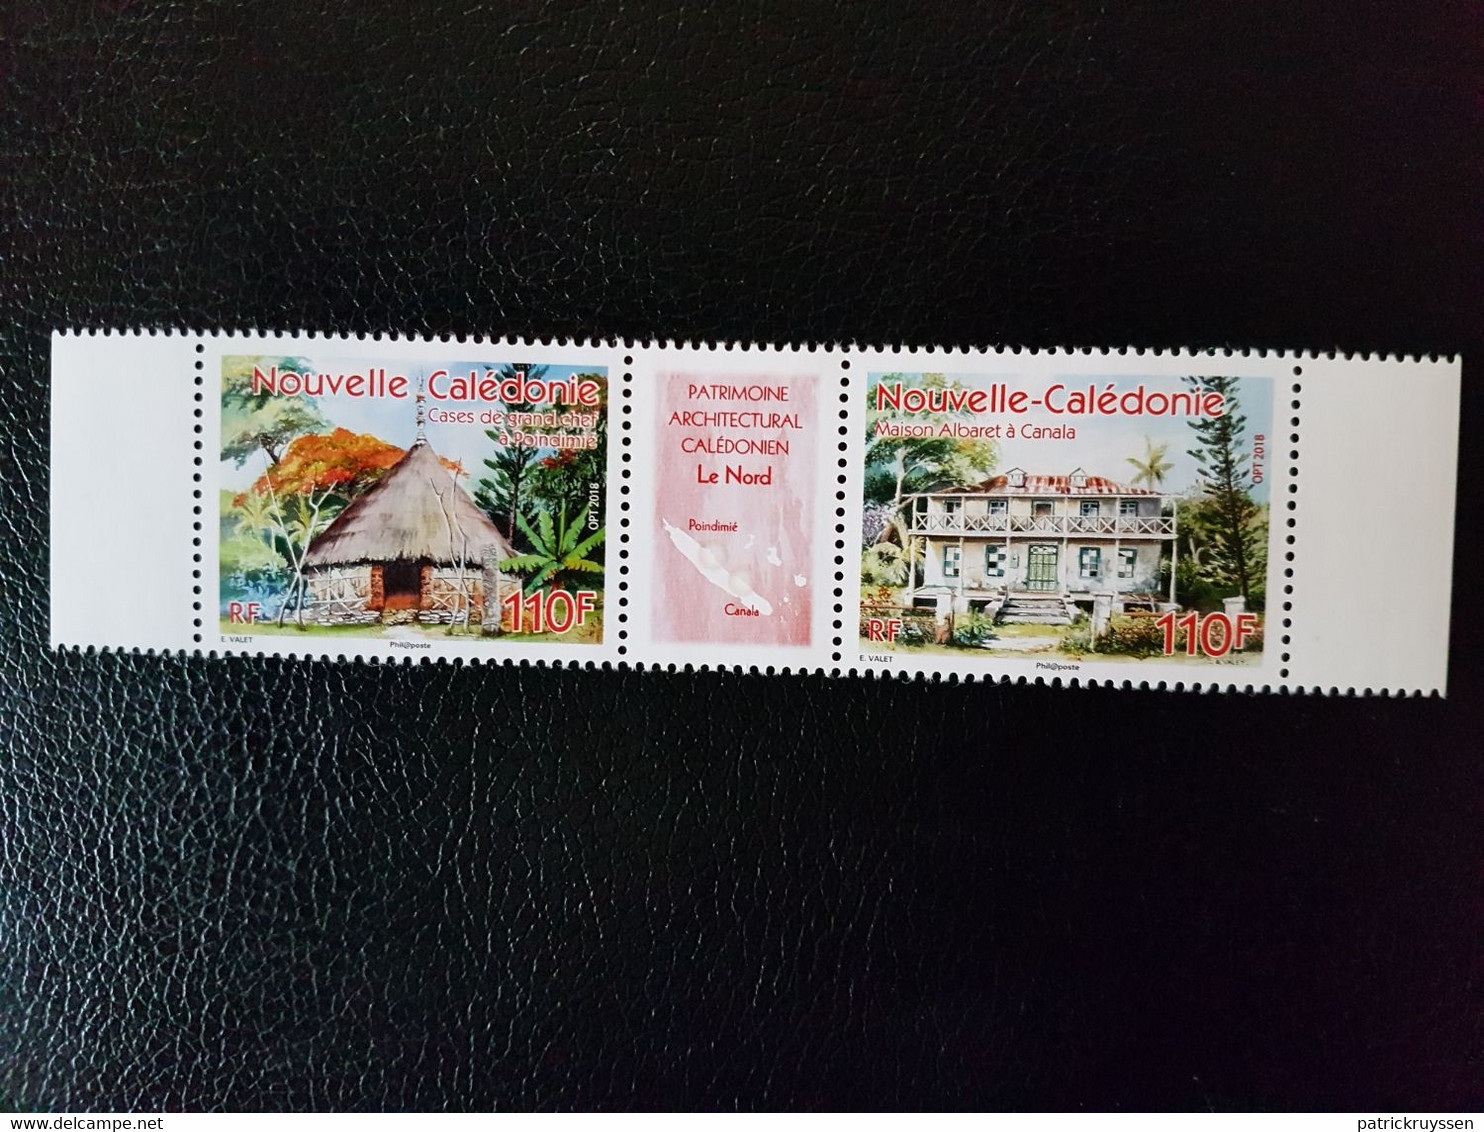 Caledonia 2018 Caledonie House Architecture Cases LE NORD Trees Palm 2v Str Mnh - Neufs